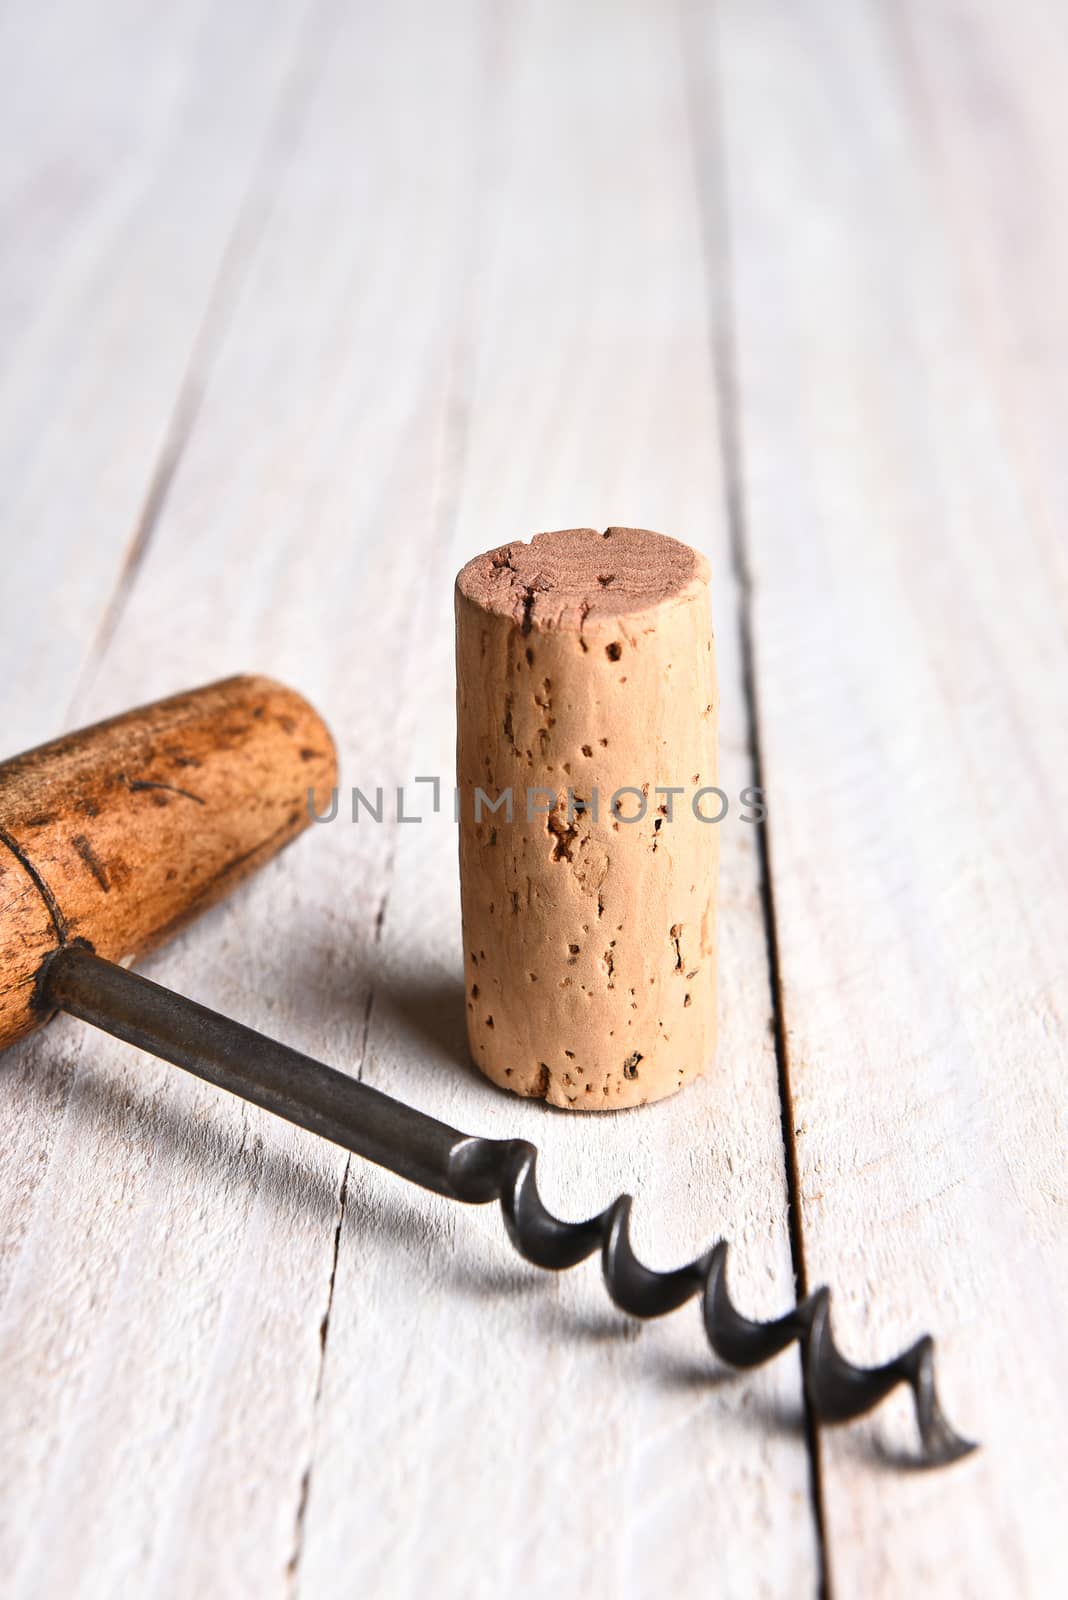 Still life closeup of a cork and corkscrew on a white wood table. Vertical format with copy space.